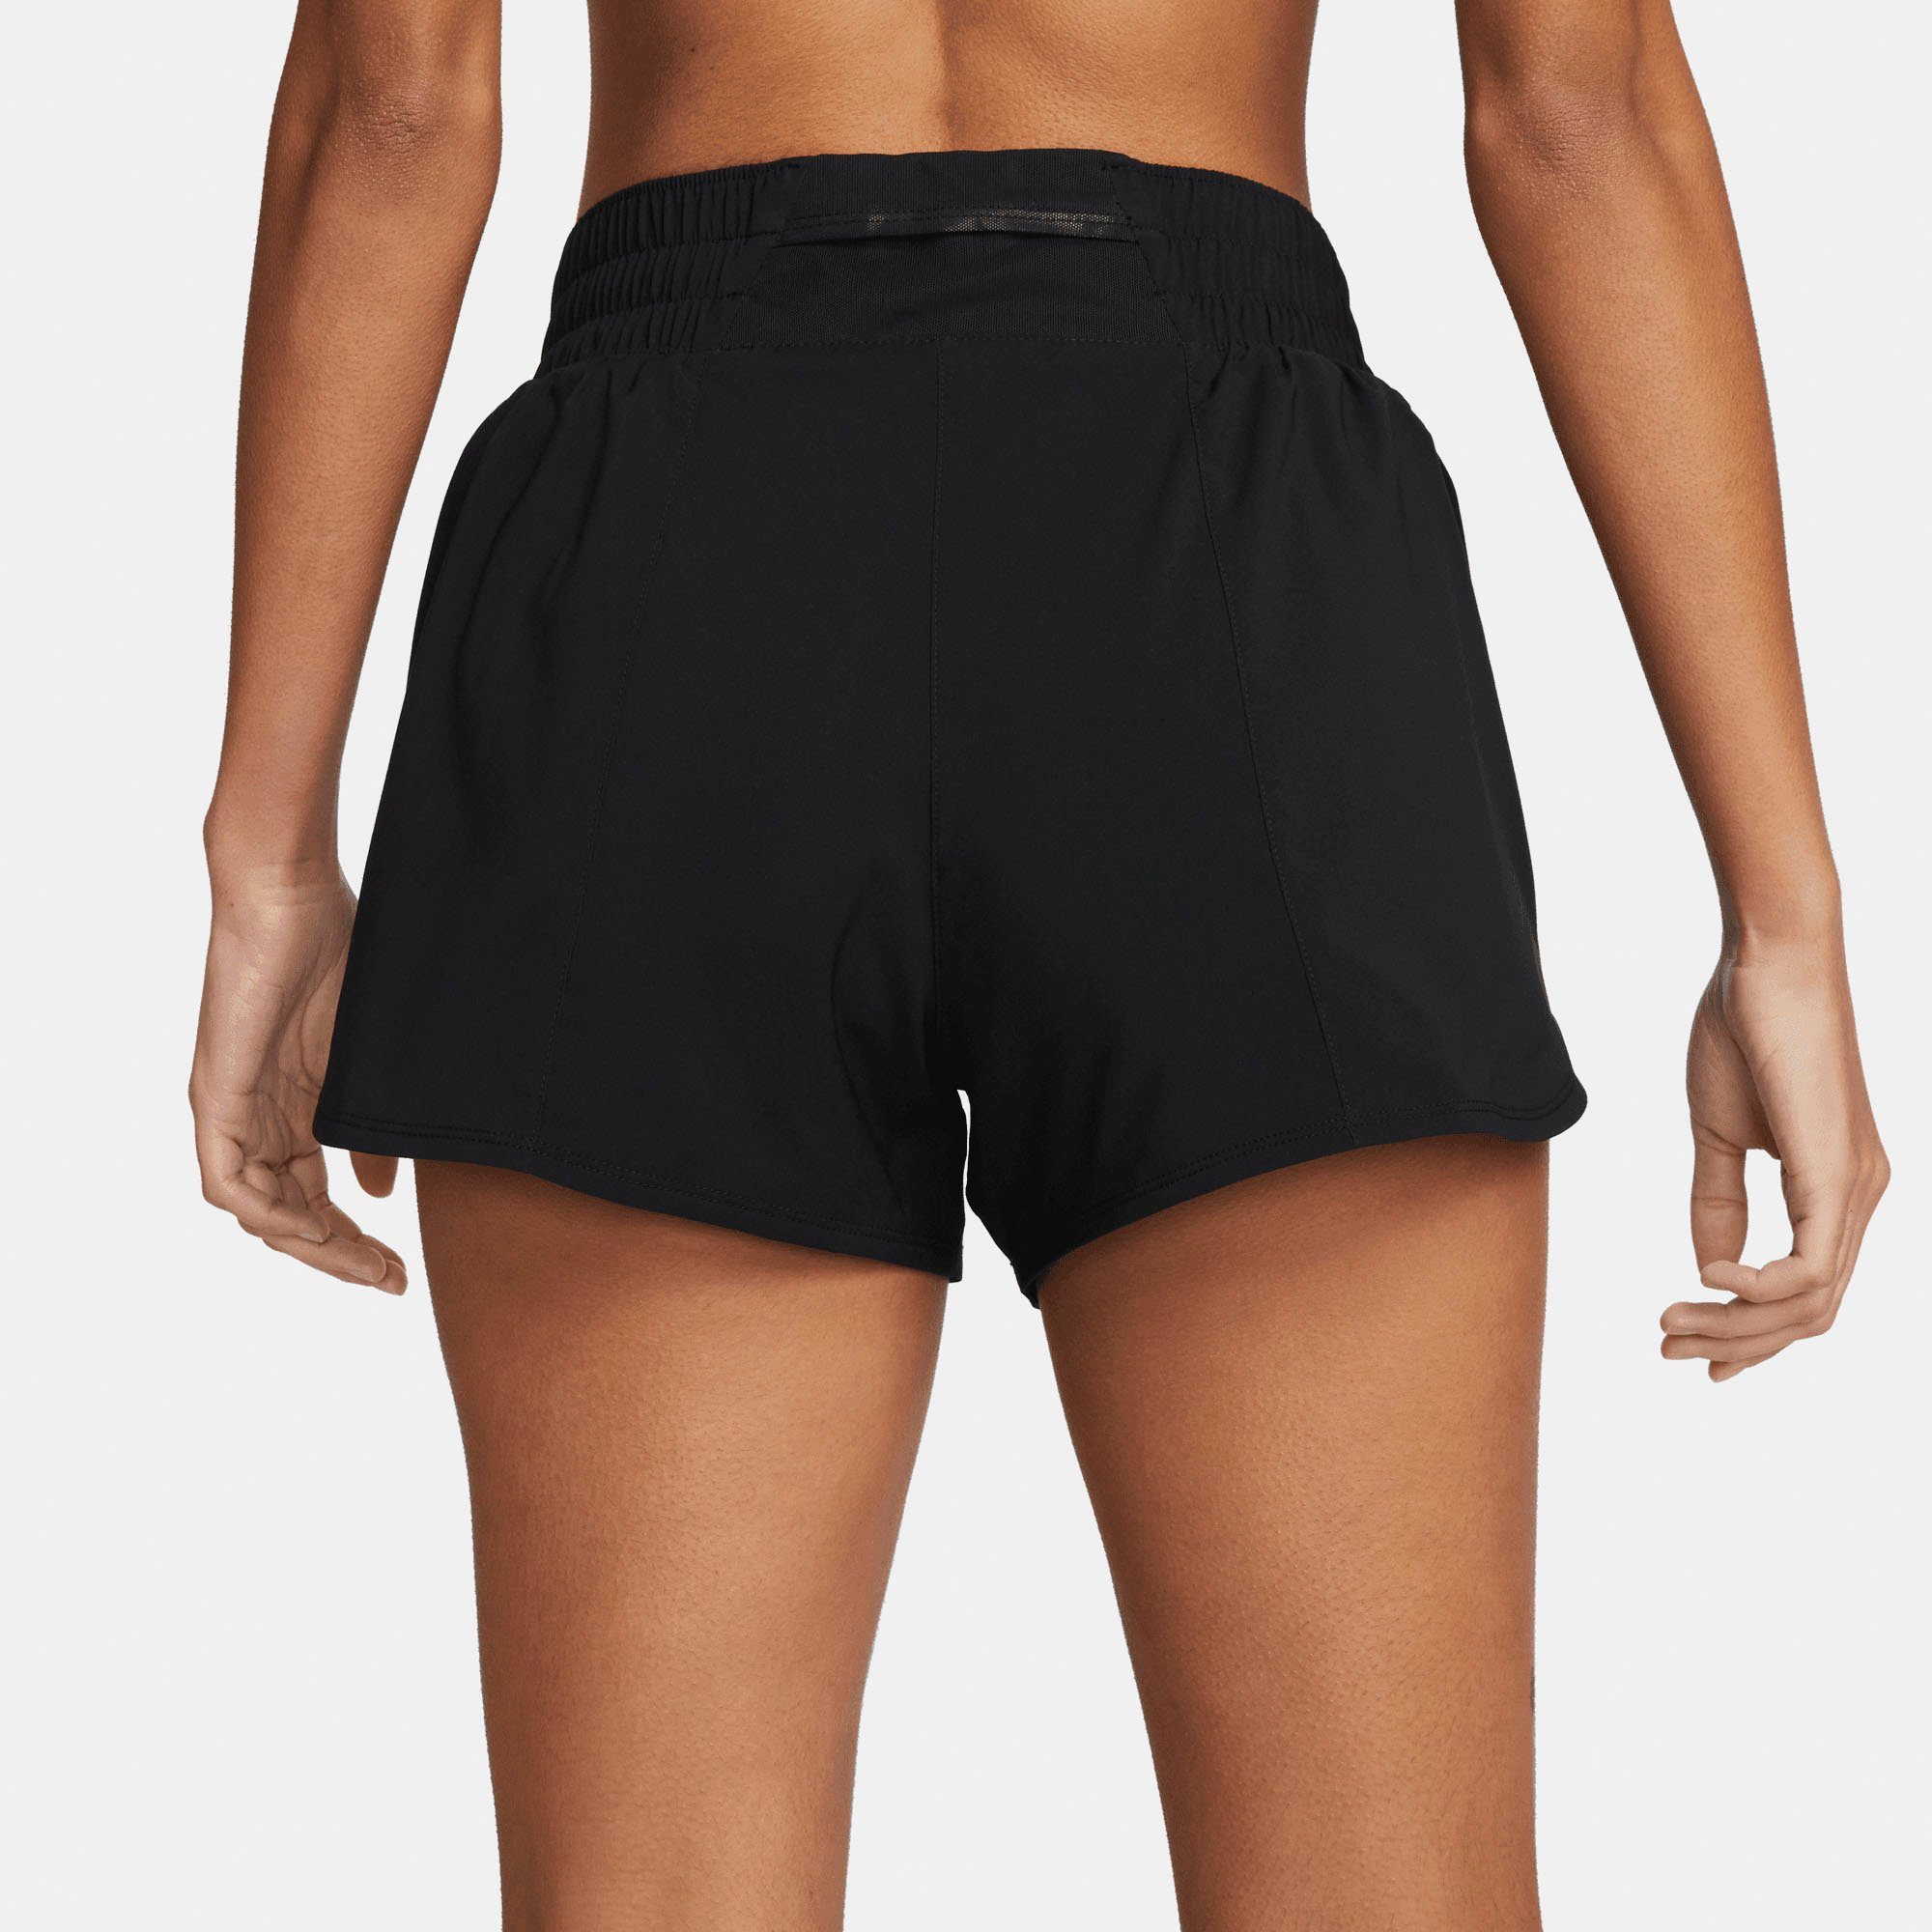 Nike Trainingsshorts ONE BLACK/REFLECTIVE WOMEN'S MID-RISE SILV SHORTS BRIEF-LINED DRI-FIT